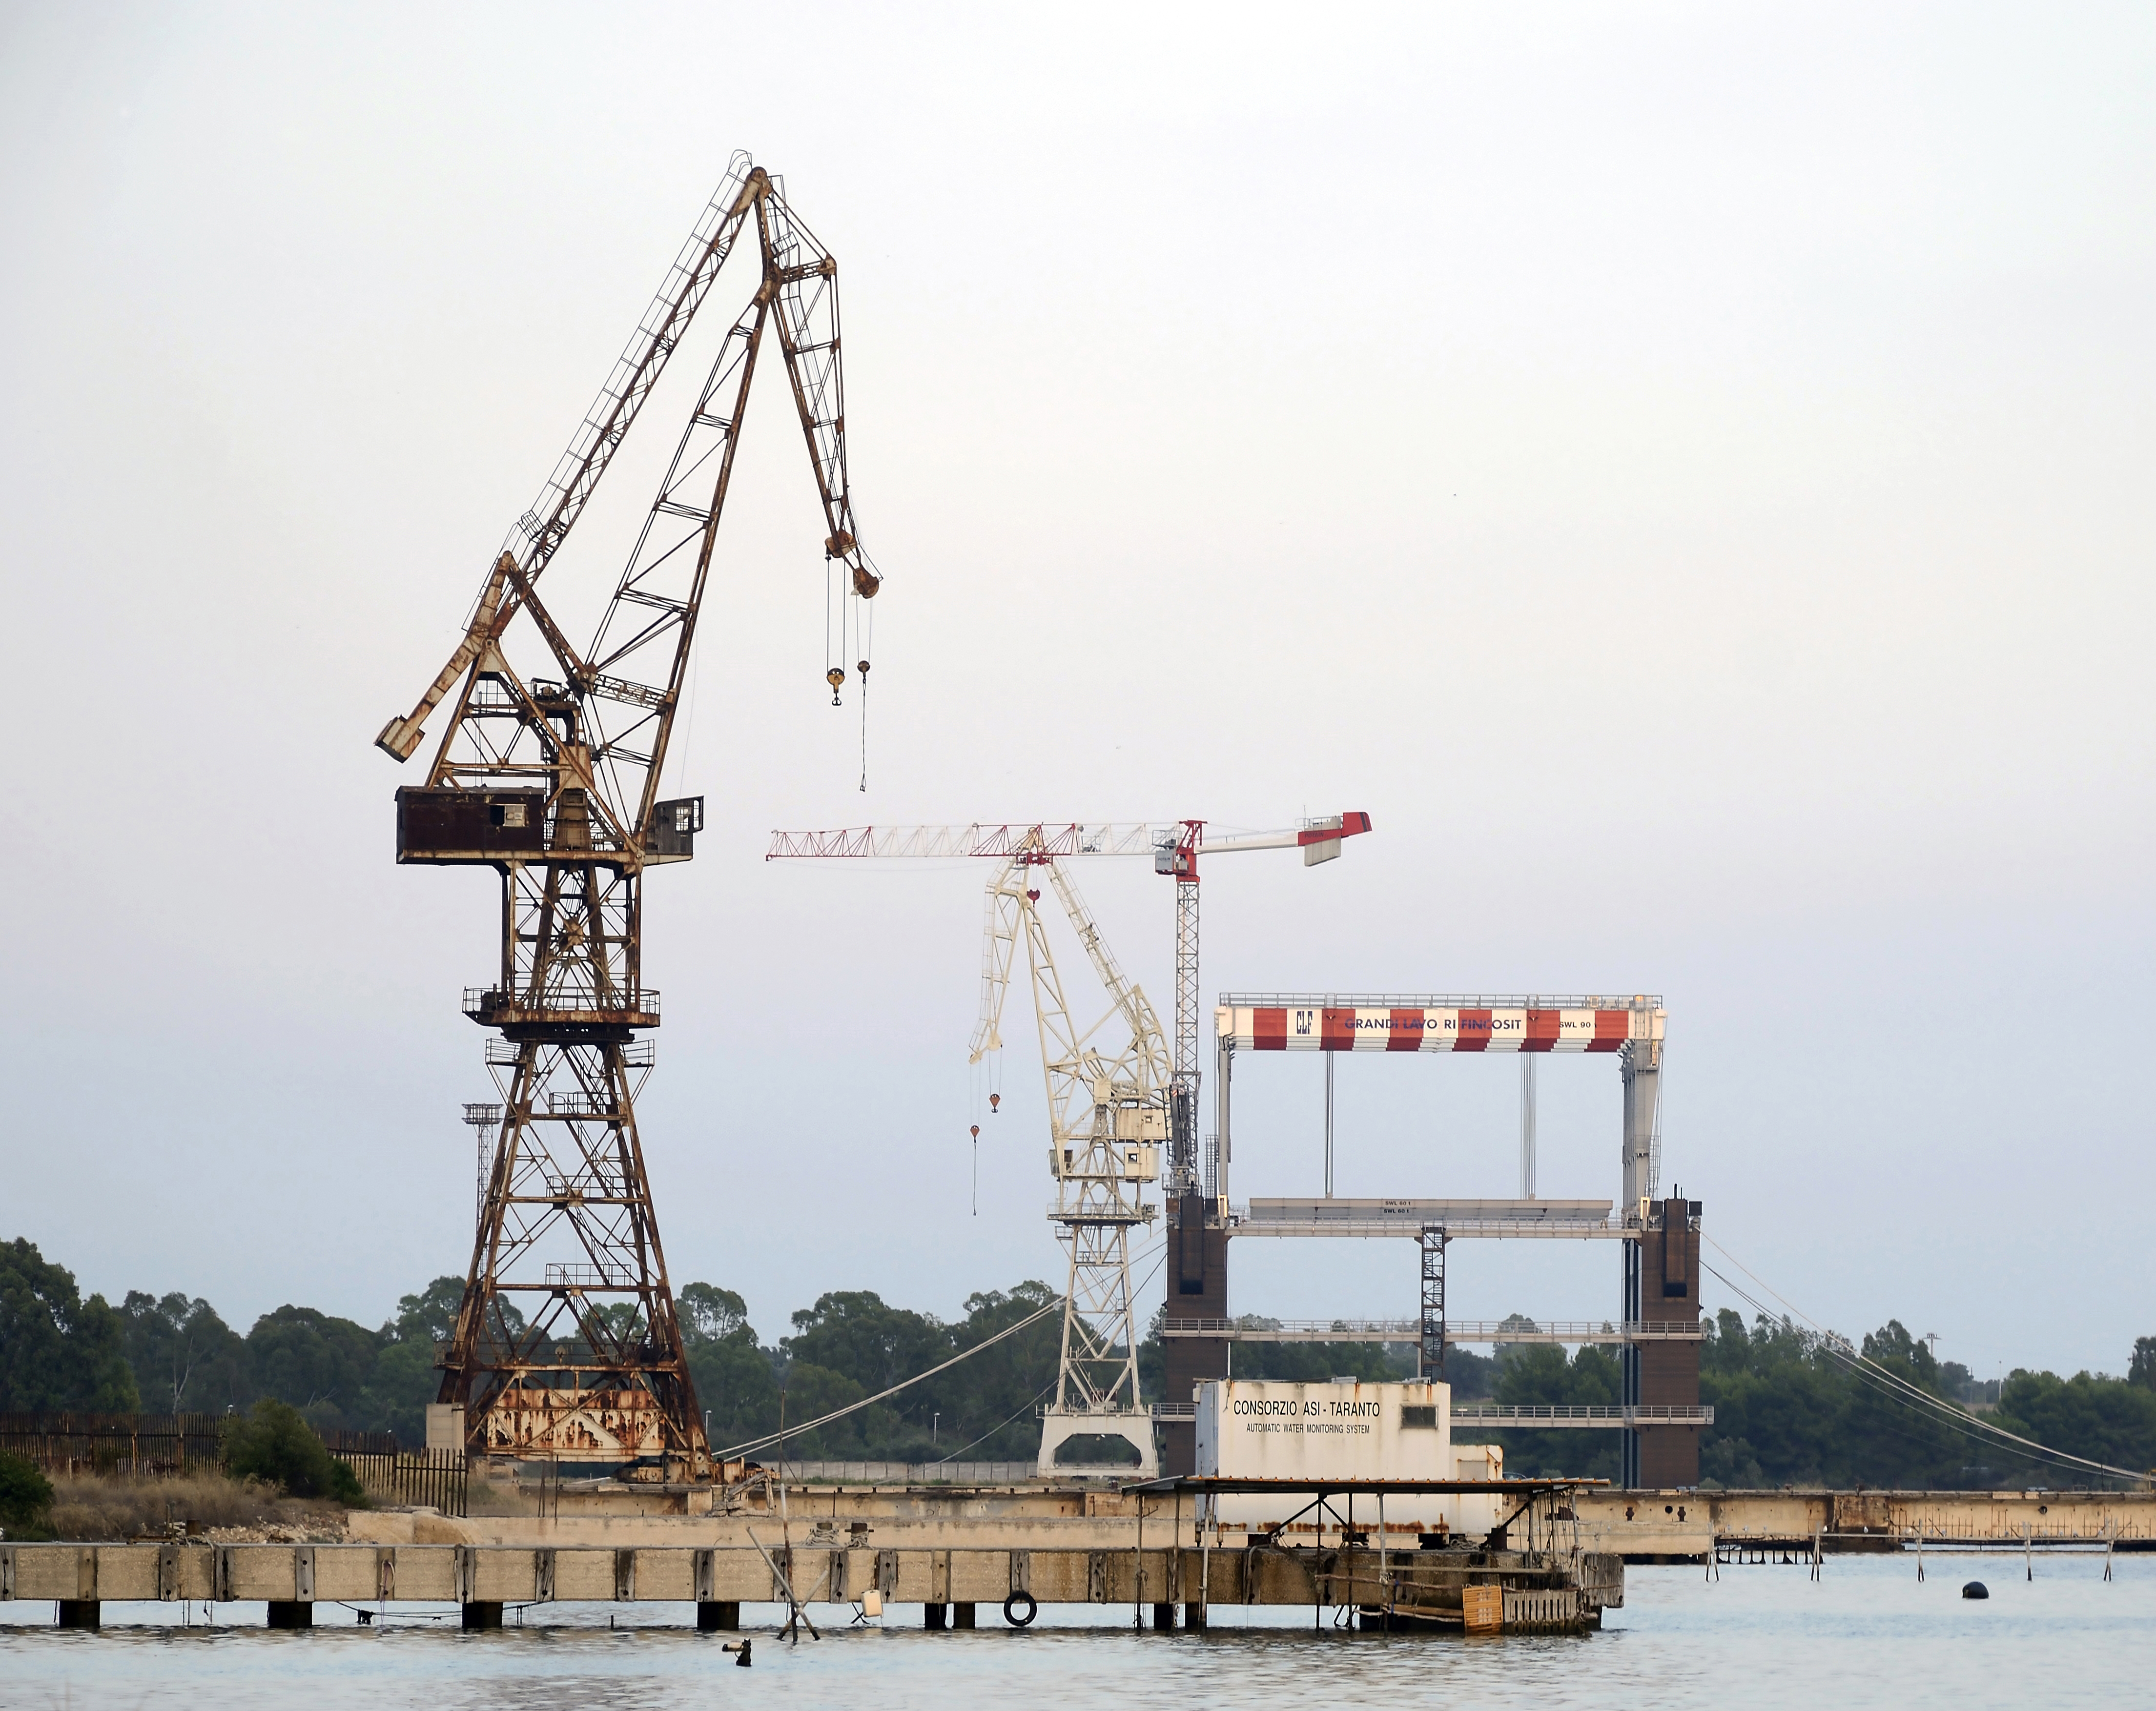 Old cranes abandoned at the port of Taranto